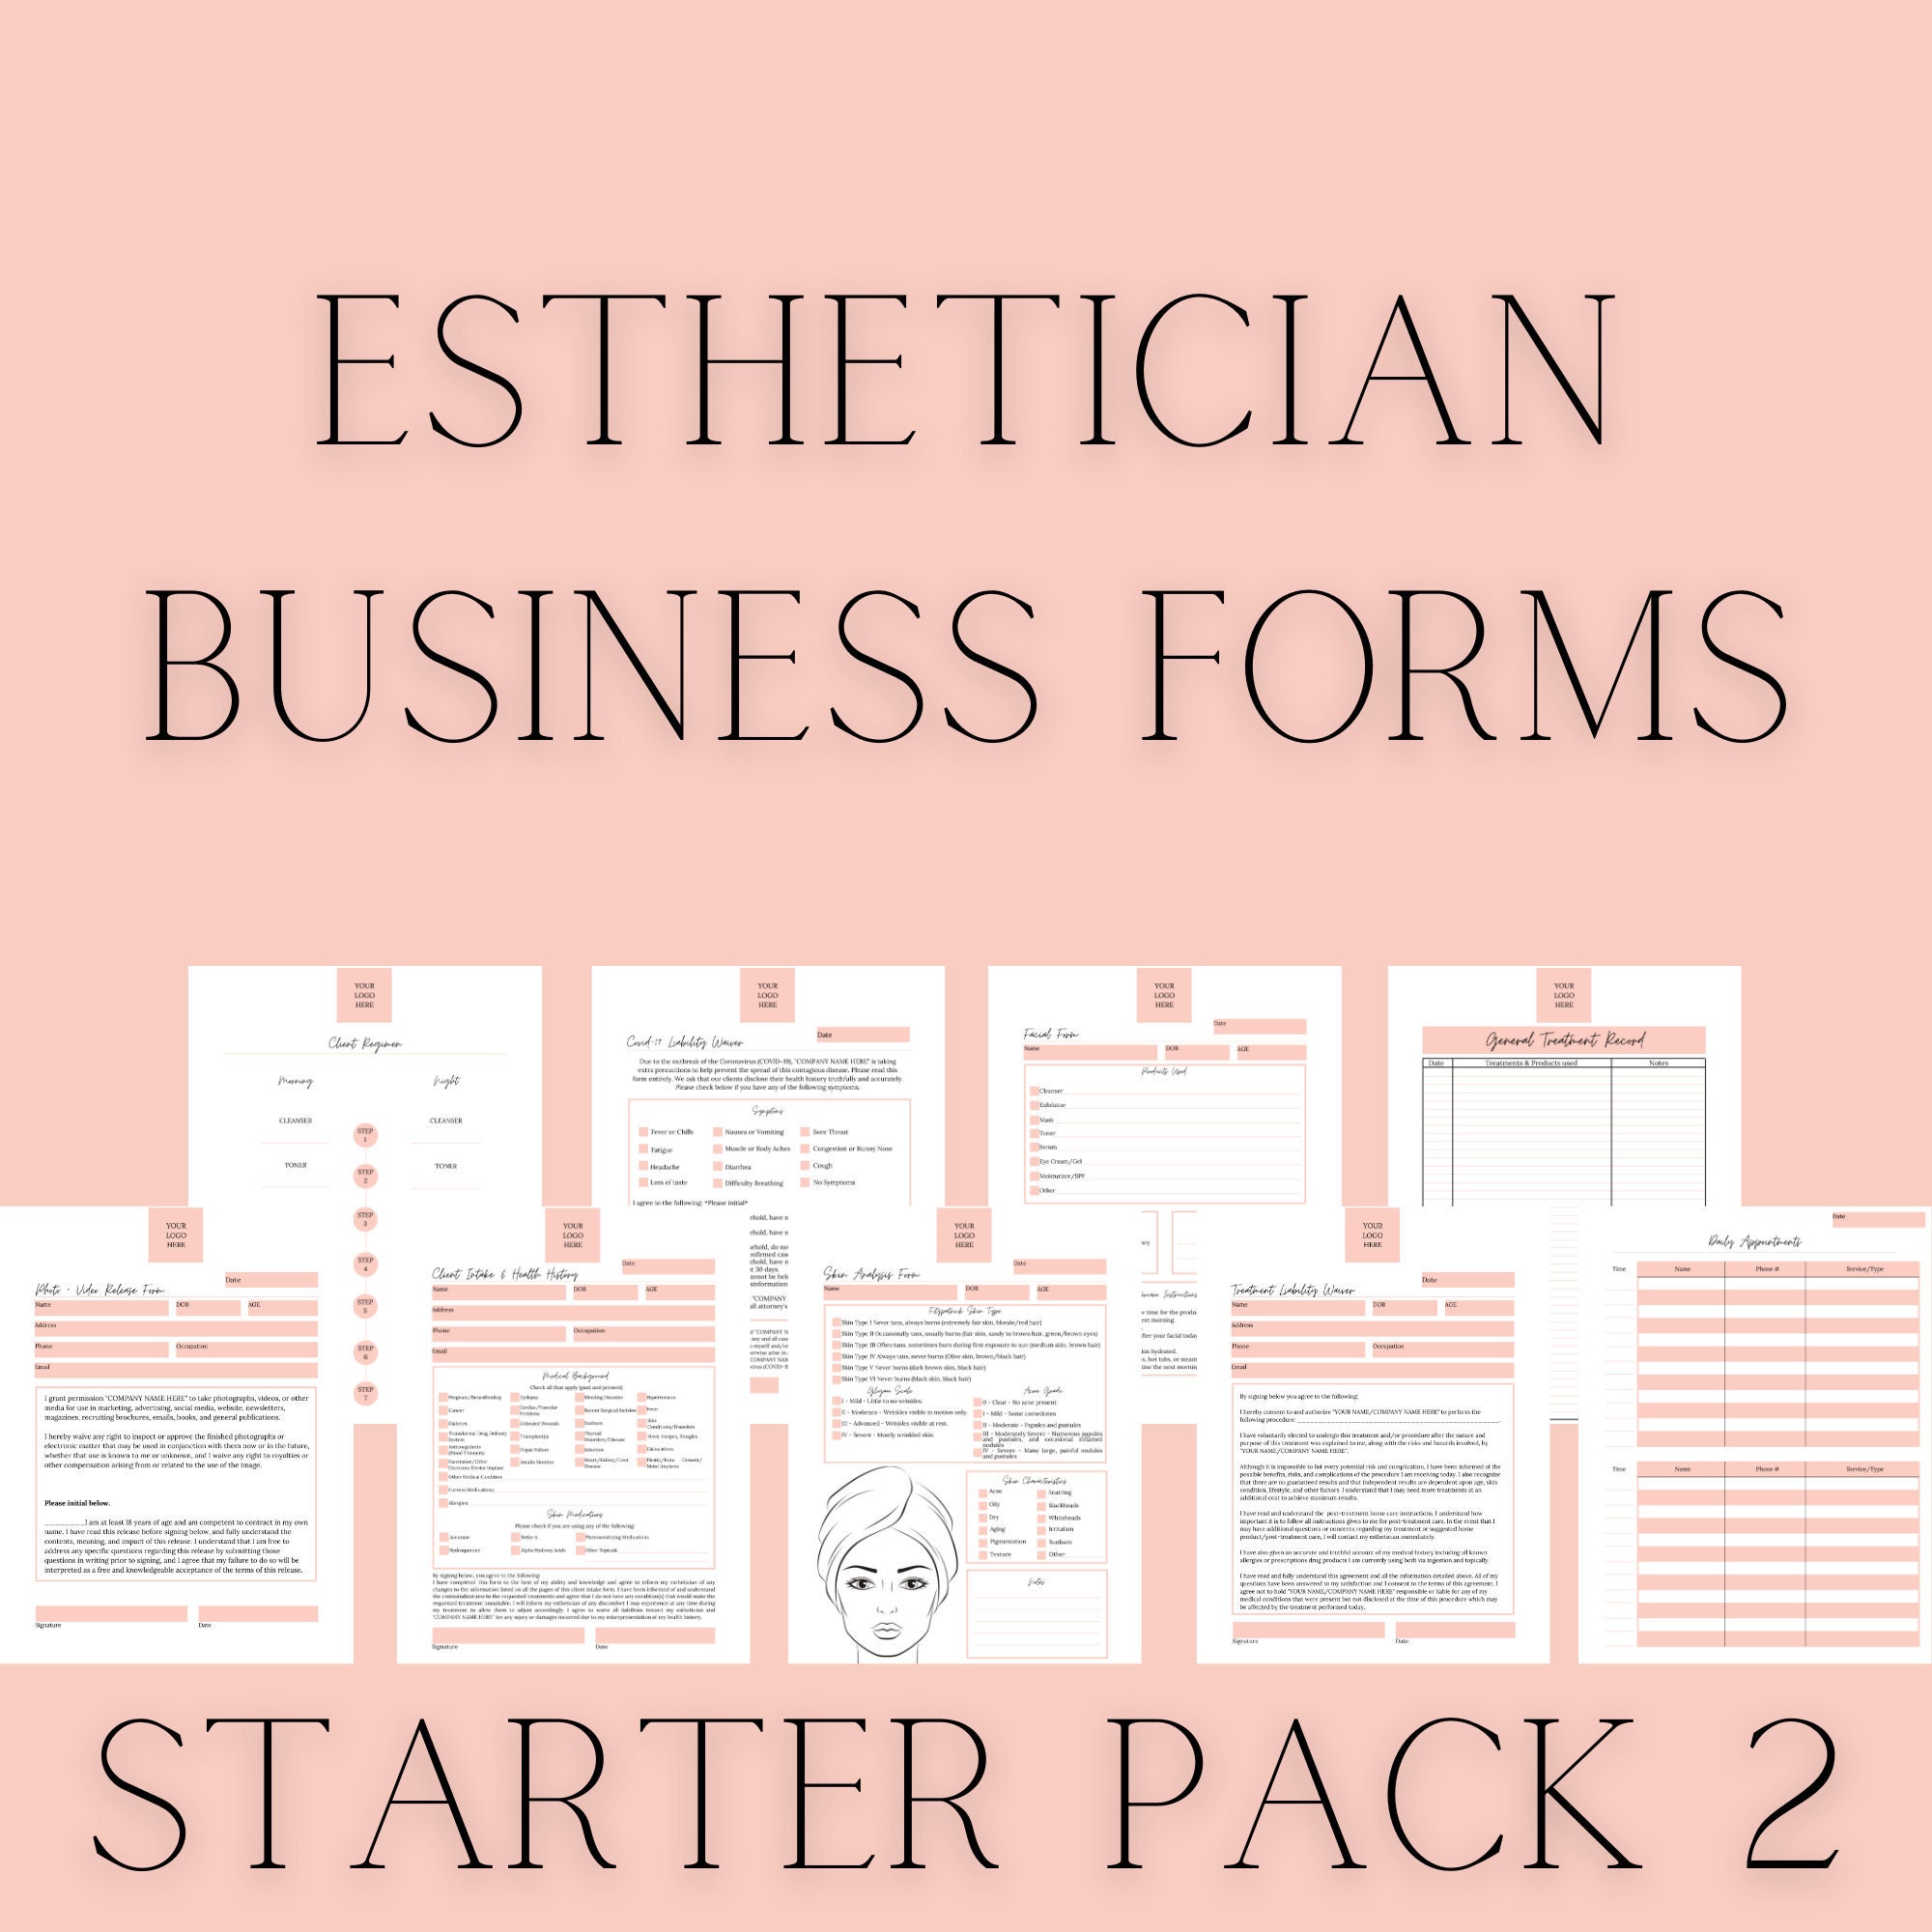 Editable Esthetician Business Form Starter Pack 4 Treatment Plan Facial Forms Skin Analysis Policies Sign-in Client Intake Feedback